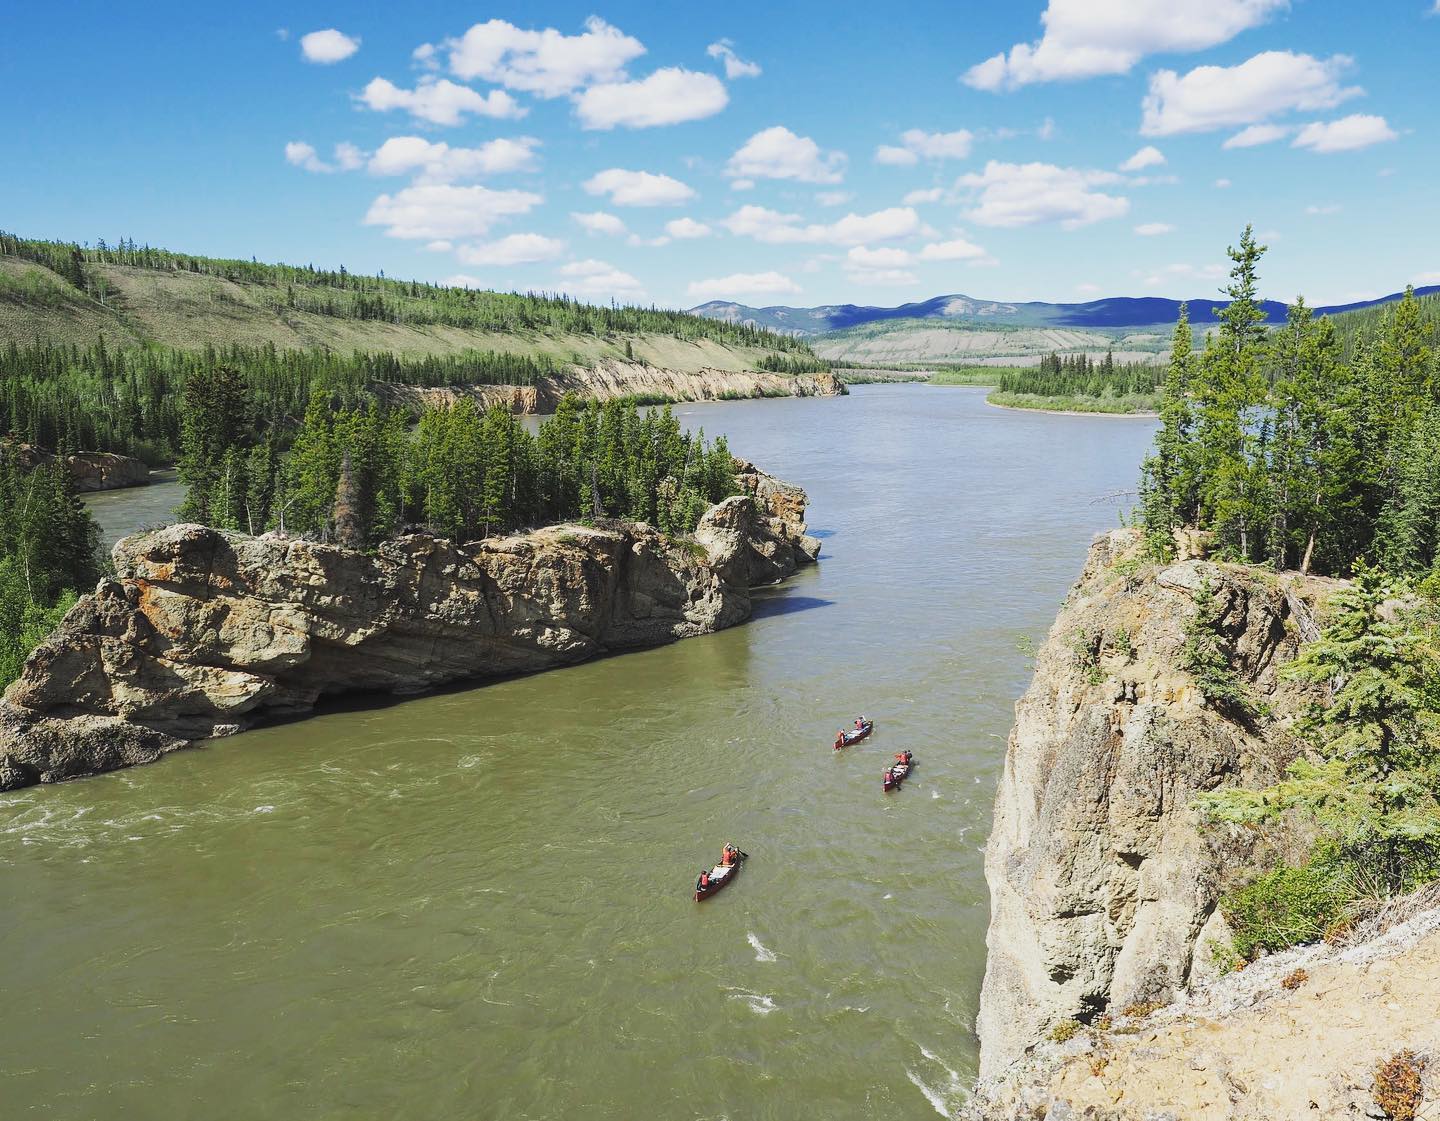 Three canoes drift down the Yukon River, Canada, surrounded by limestone cliffs.